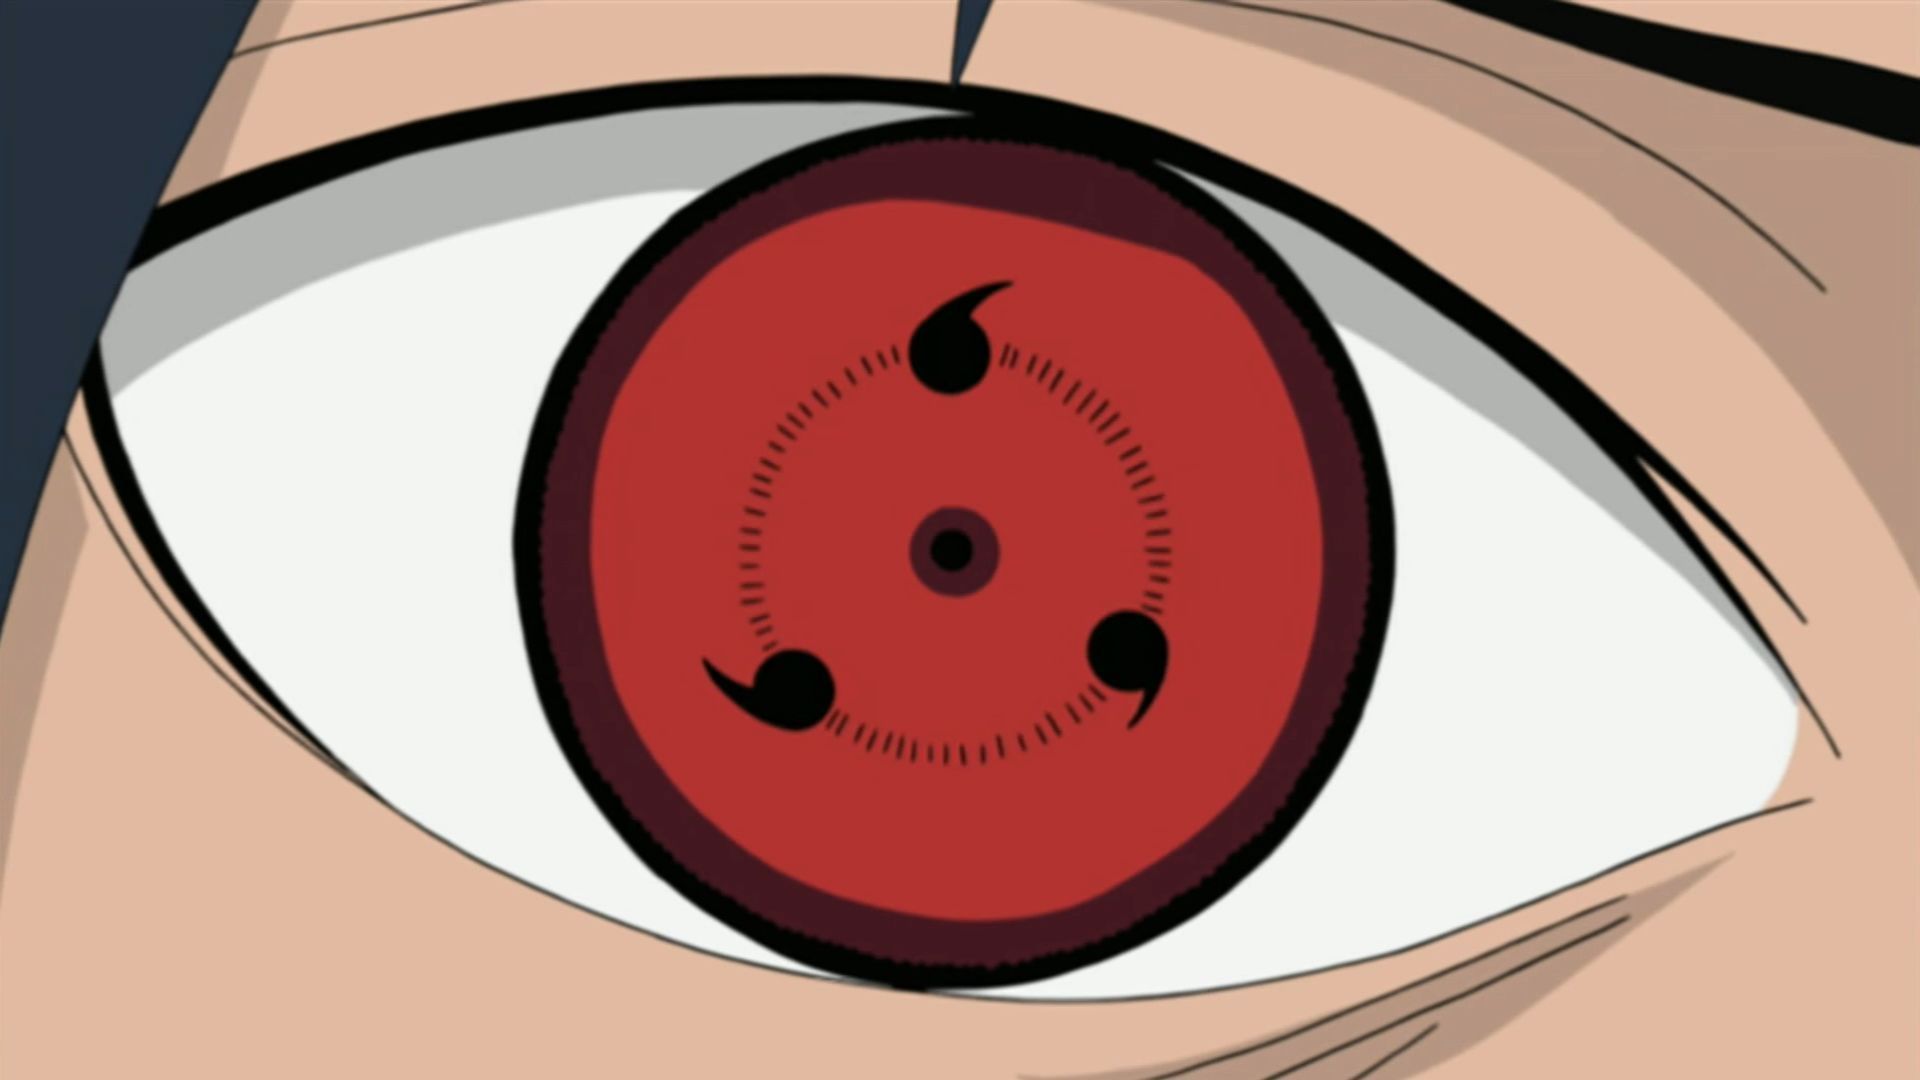 Naruto fans are accusing Yuki Tabata of copying the Sharingan with Black Clover